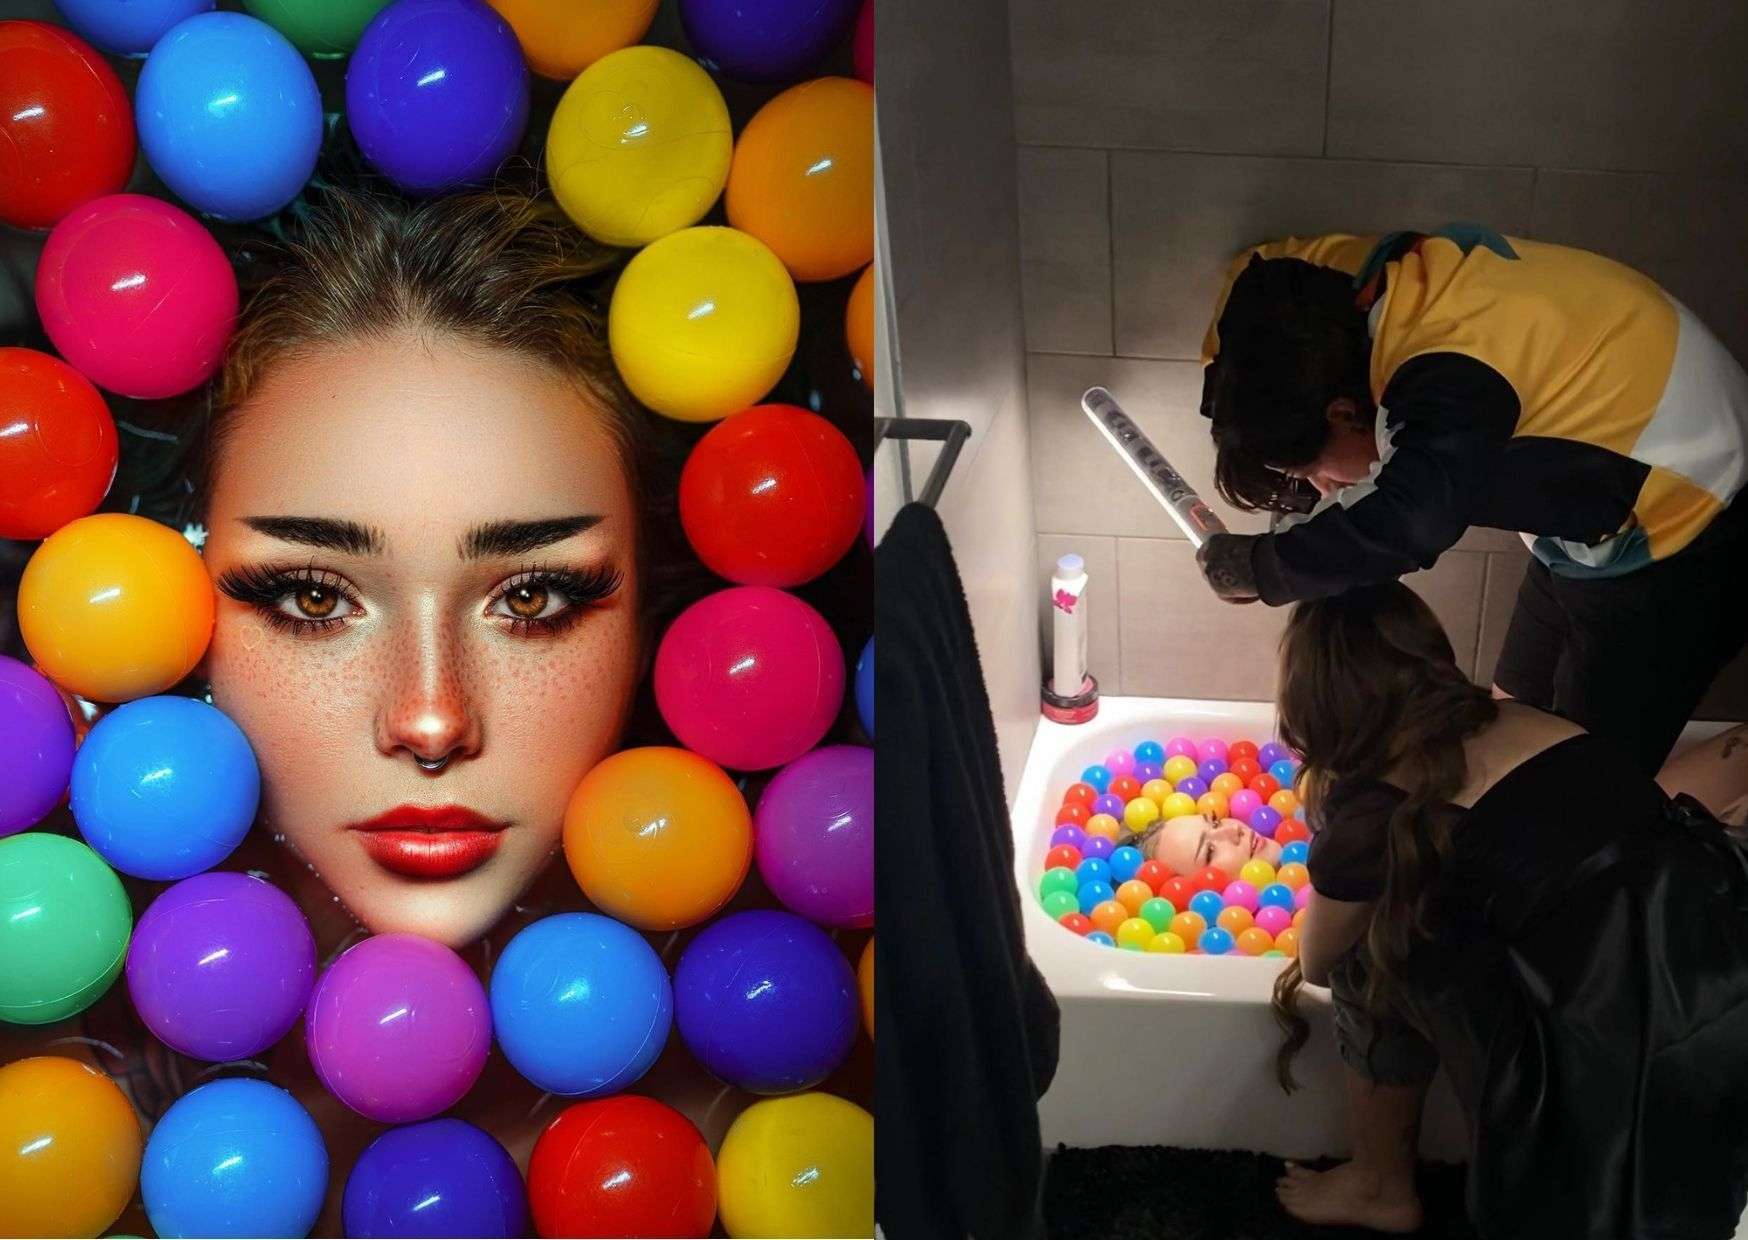 US-Based Photographer Shares What Happens Behind The Scenes In His Surreal Images